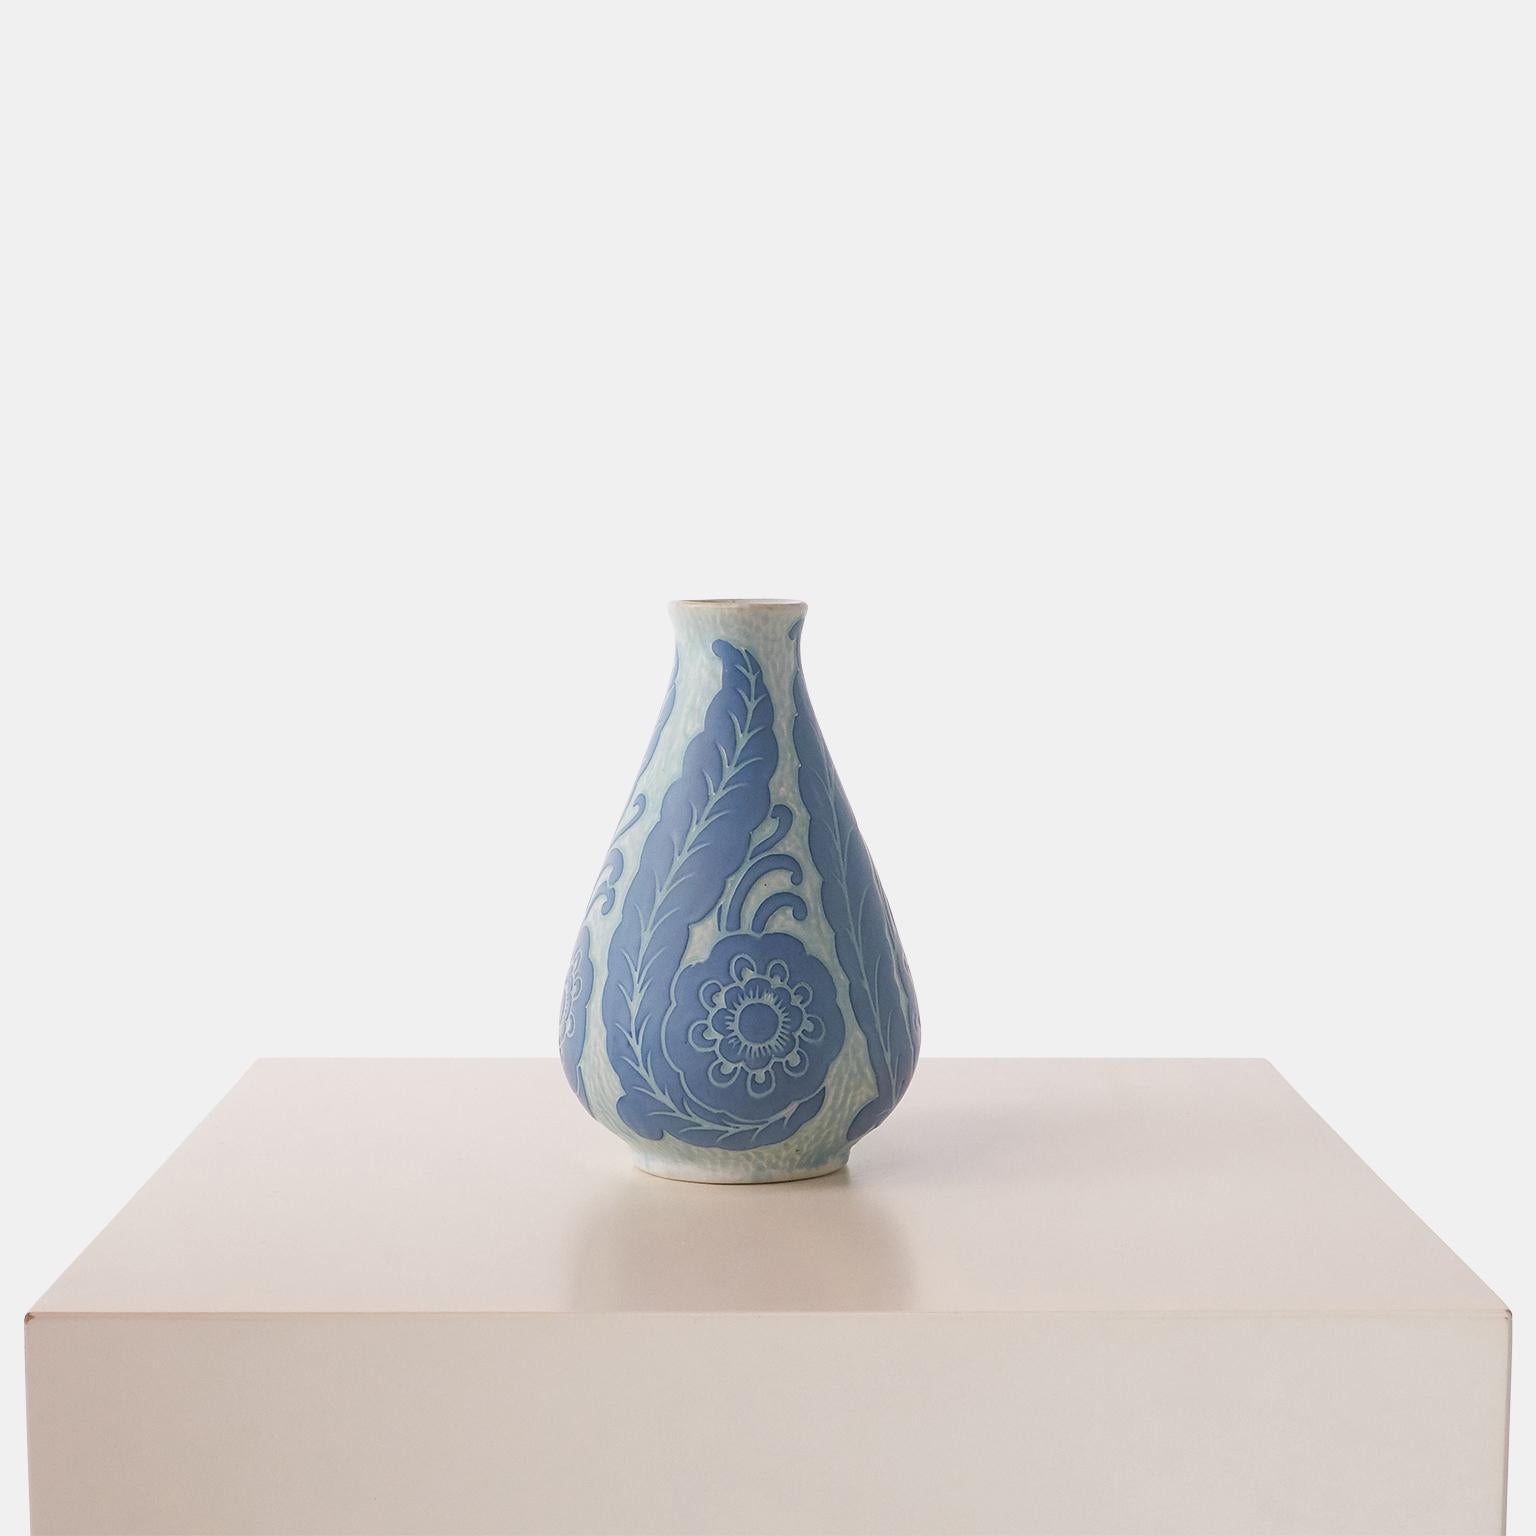 A handmade blue vase by Josef Ekberg for Gustavsberg. Each piece is unique and decorated with the Sgrafitto technique that was developed by Ekberg himself.

Signed : Gustavsberg, 1920, JE.